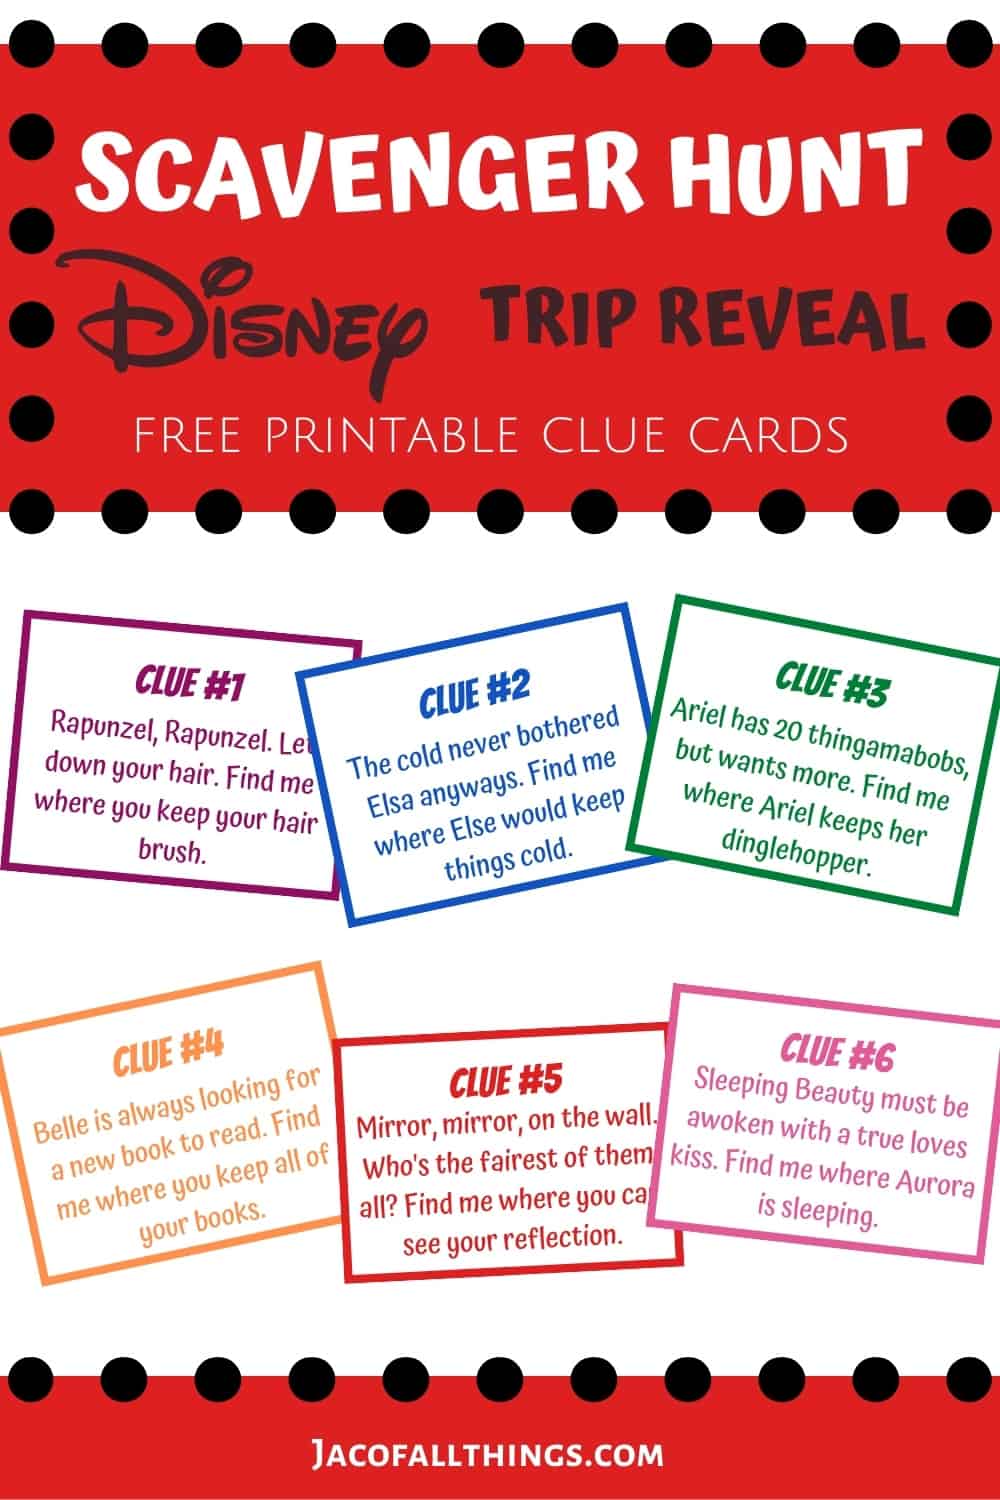 If you're looking for a fun and creative way to tell your kids that you're going to Disney, look no further! This Disney trip reveal scavenger hunt is sure to get them excited. 